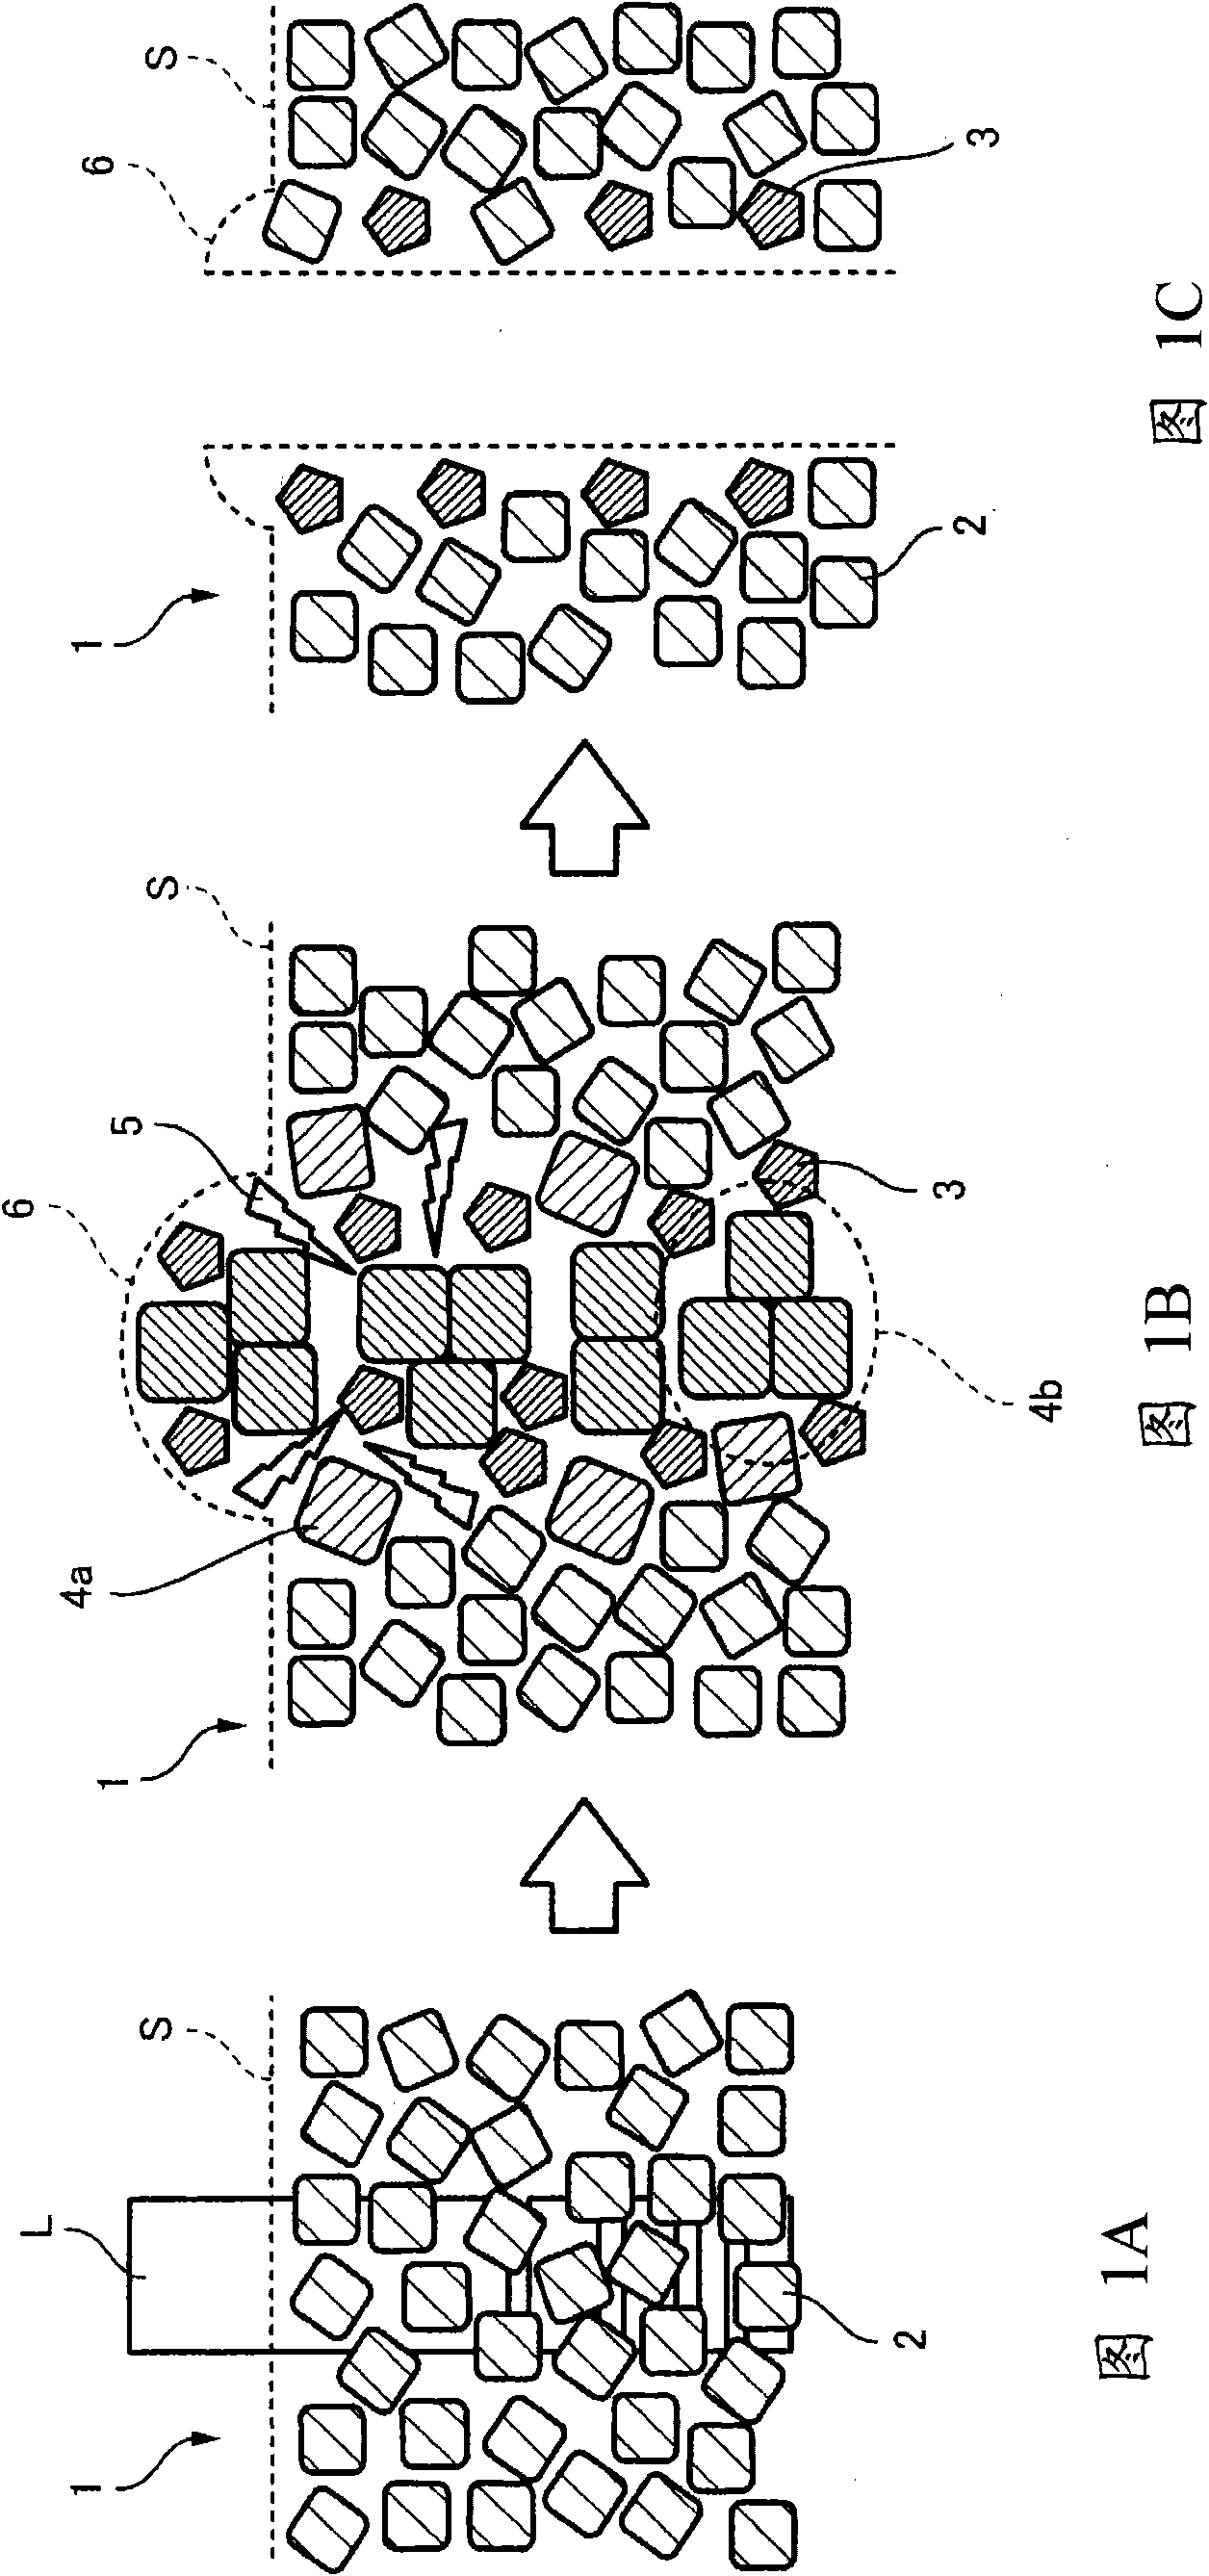 Developing solution and method for production of finely patterned material